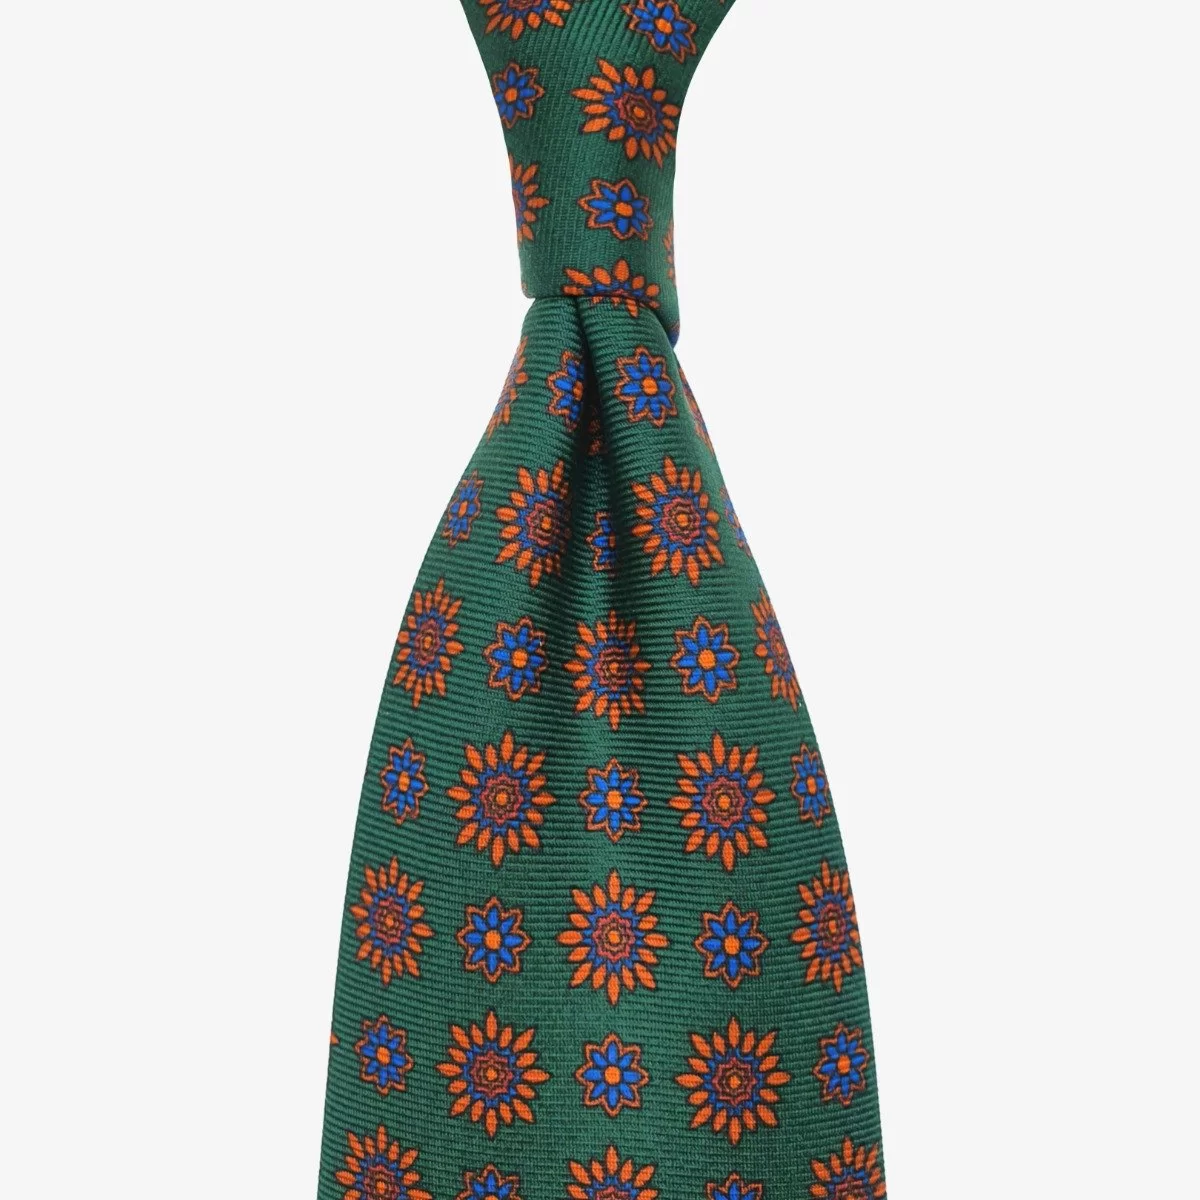 Shibumi Firenze green ancient madder silk tie with floral pattern